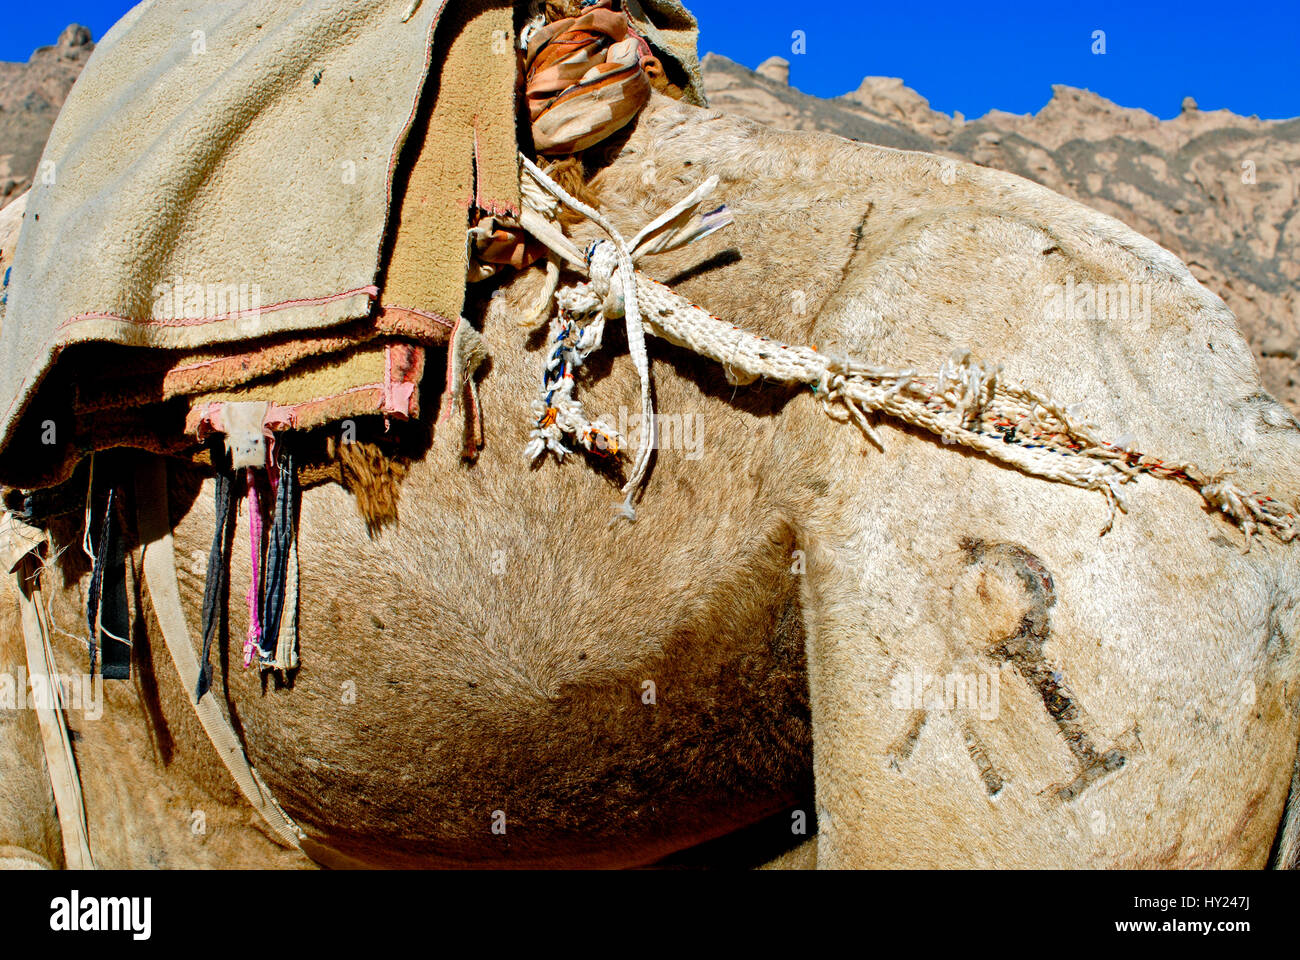 Image of a brand mark on a Bedouin camel in the Sinai Desert, Egypt. Stock Photo